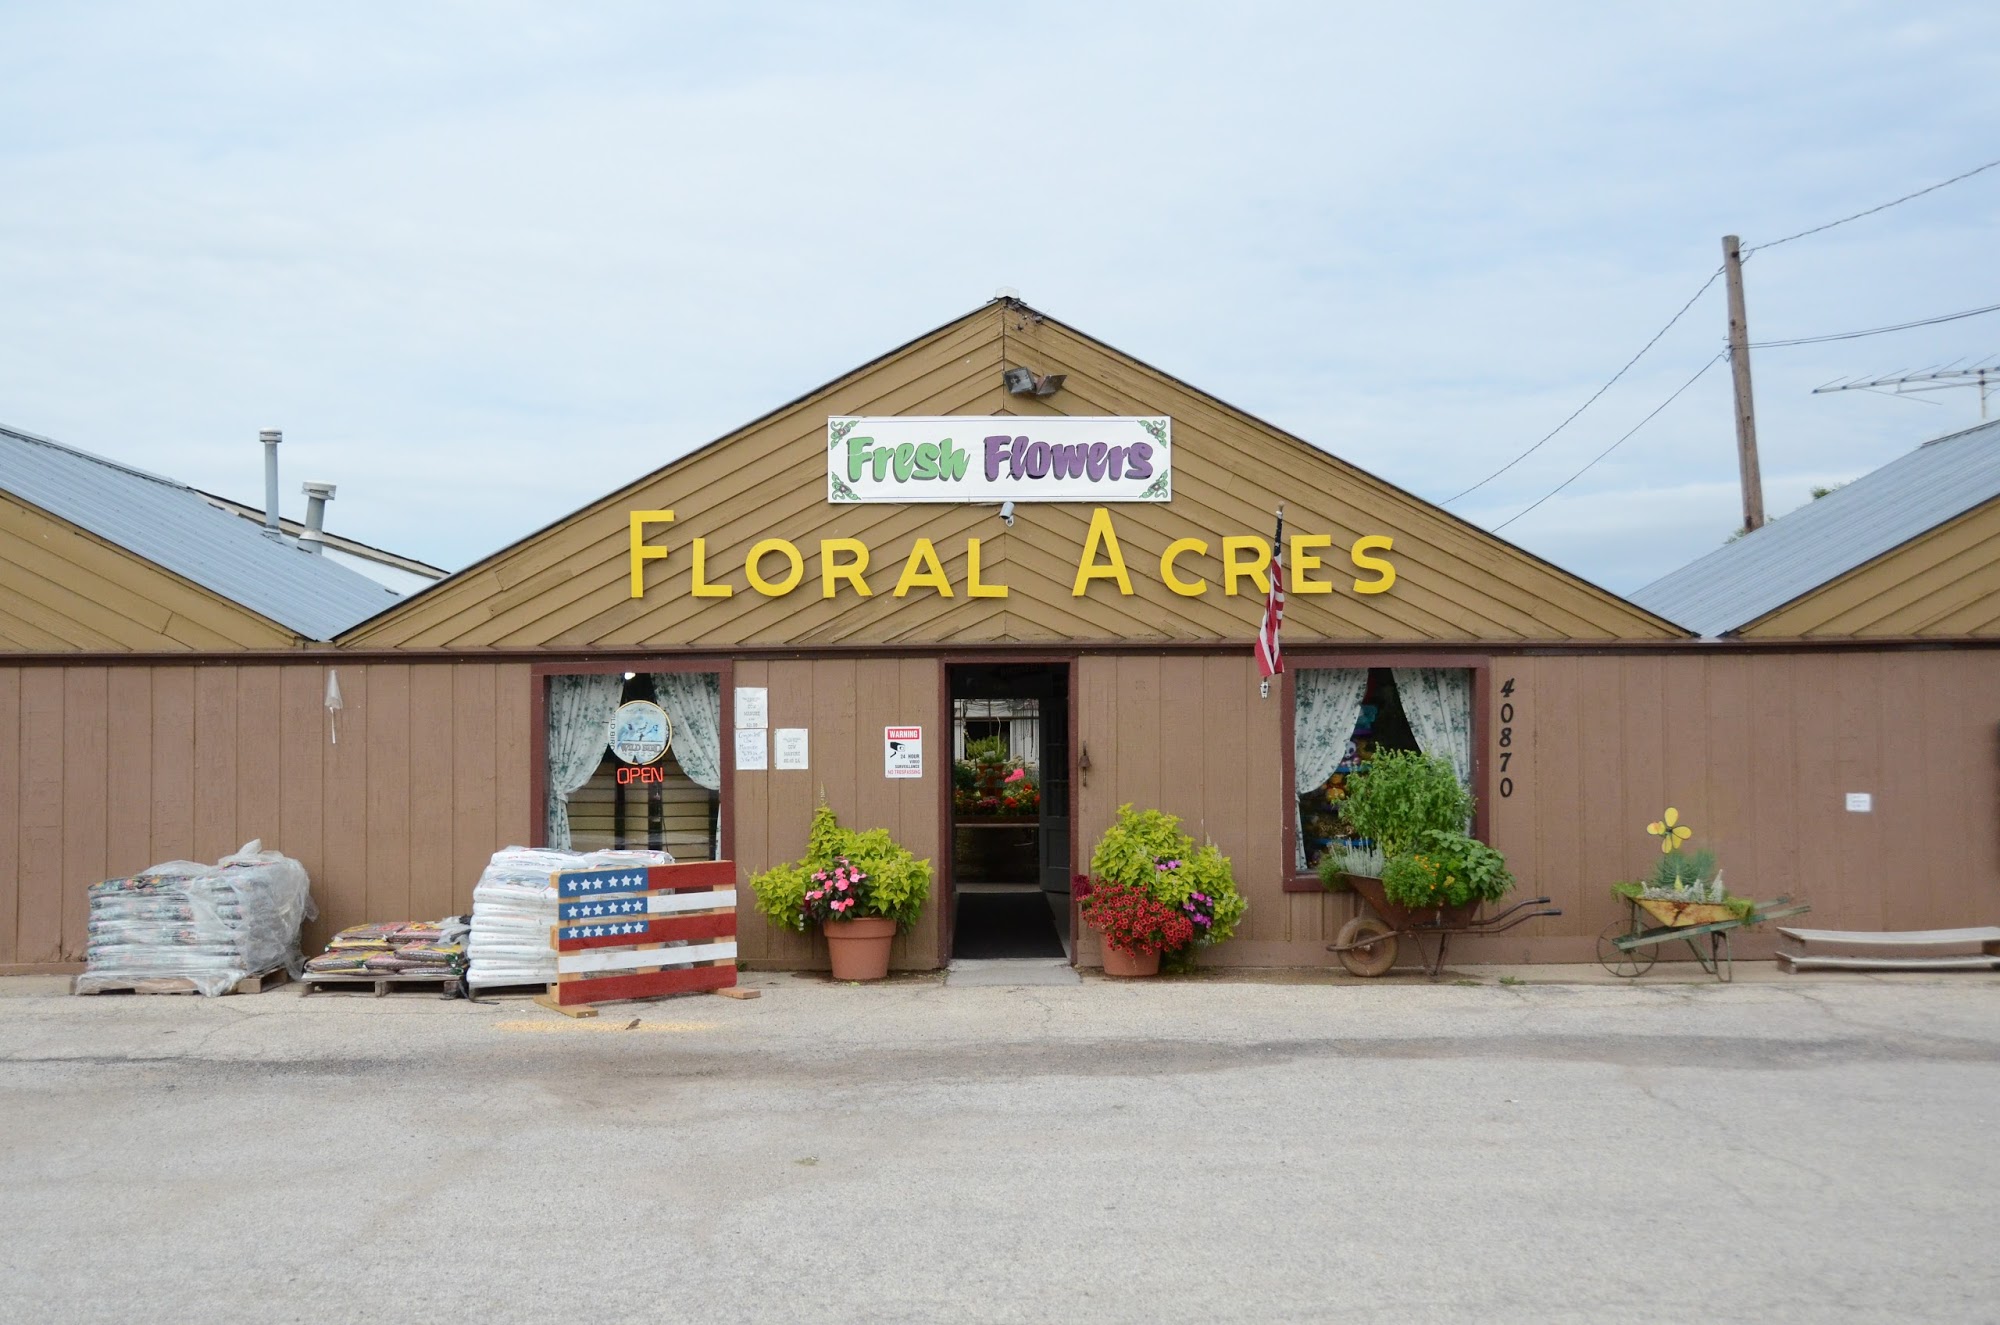 Floral Acres Florist and Greenhouse